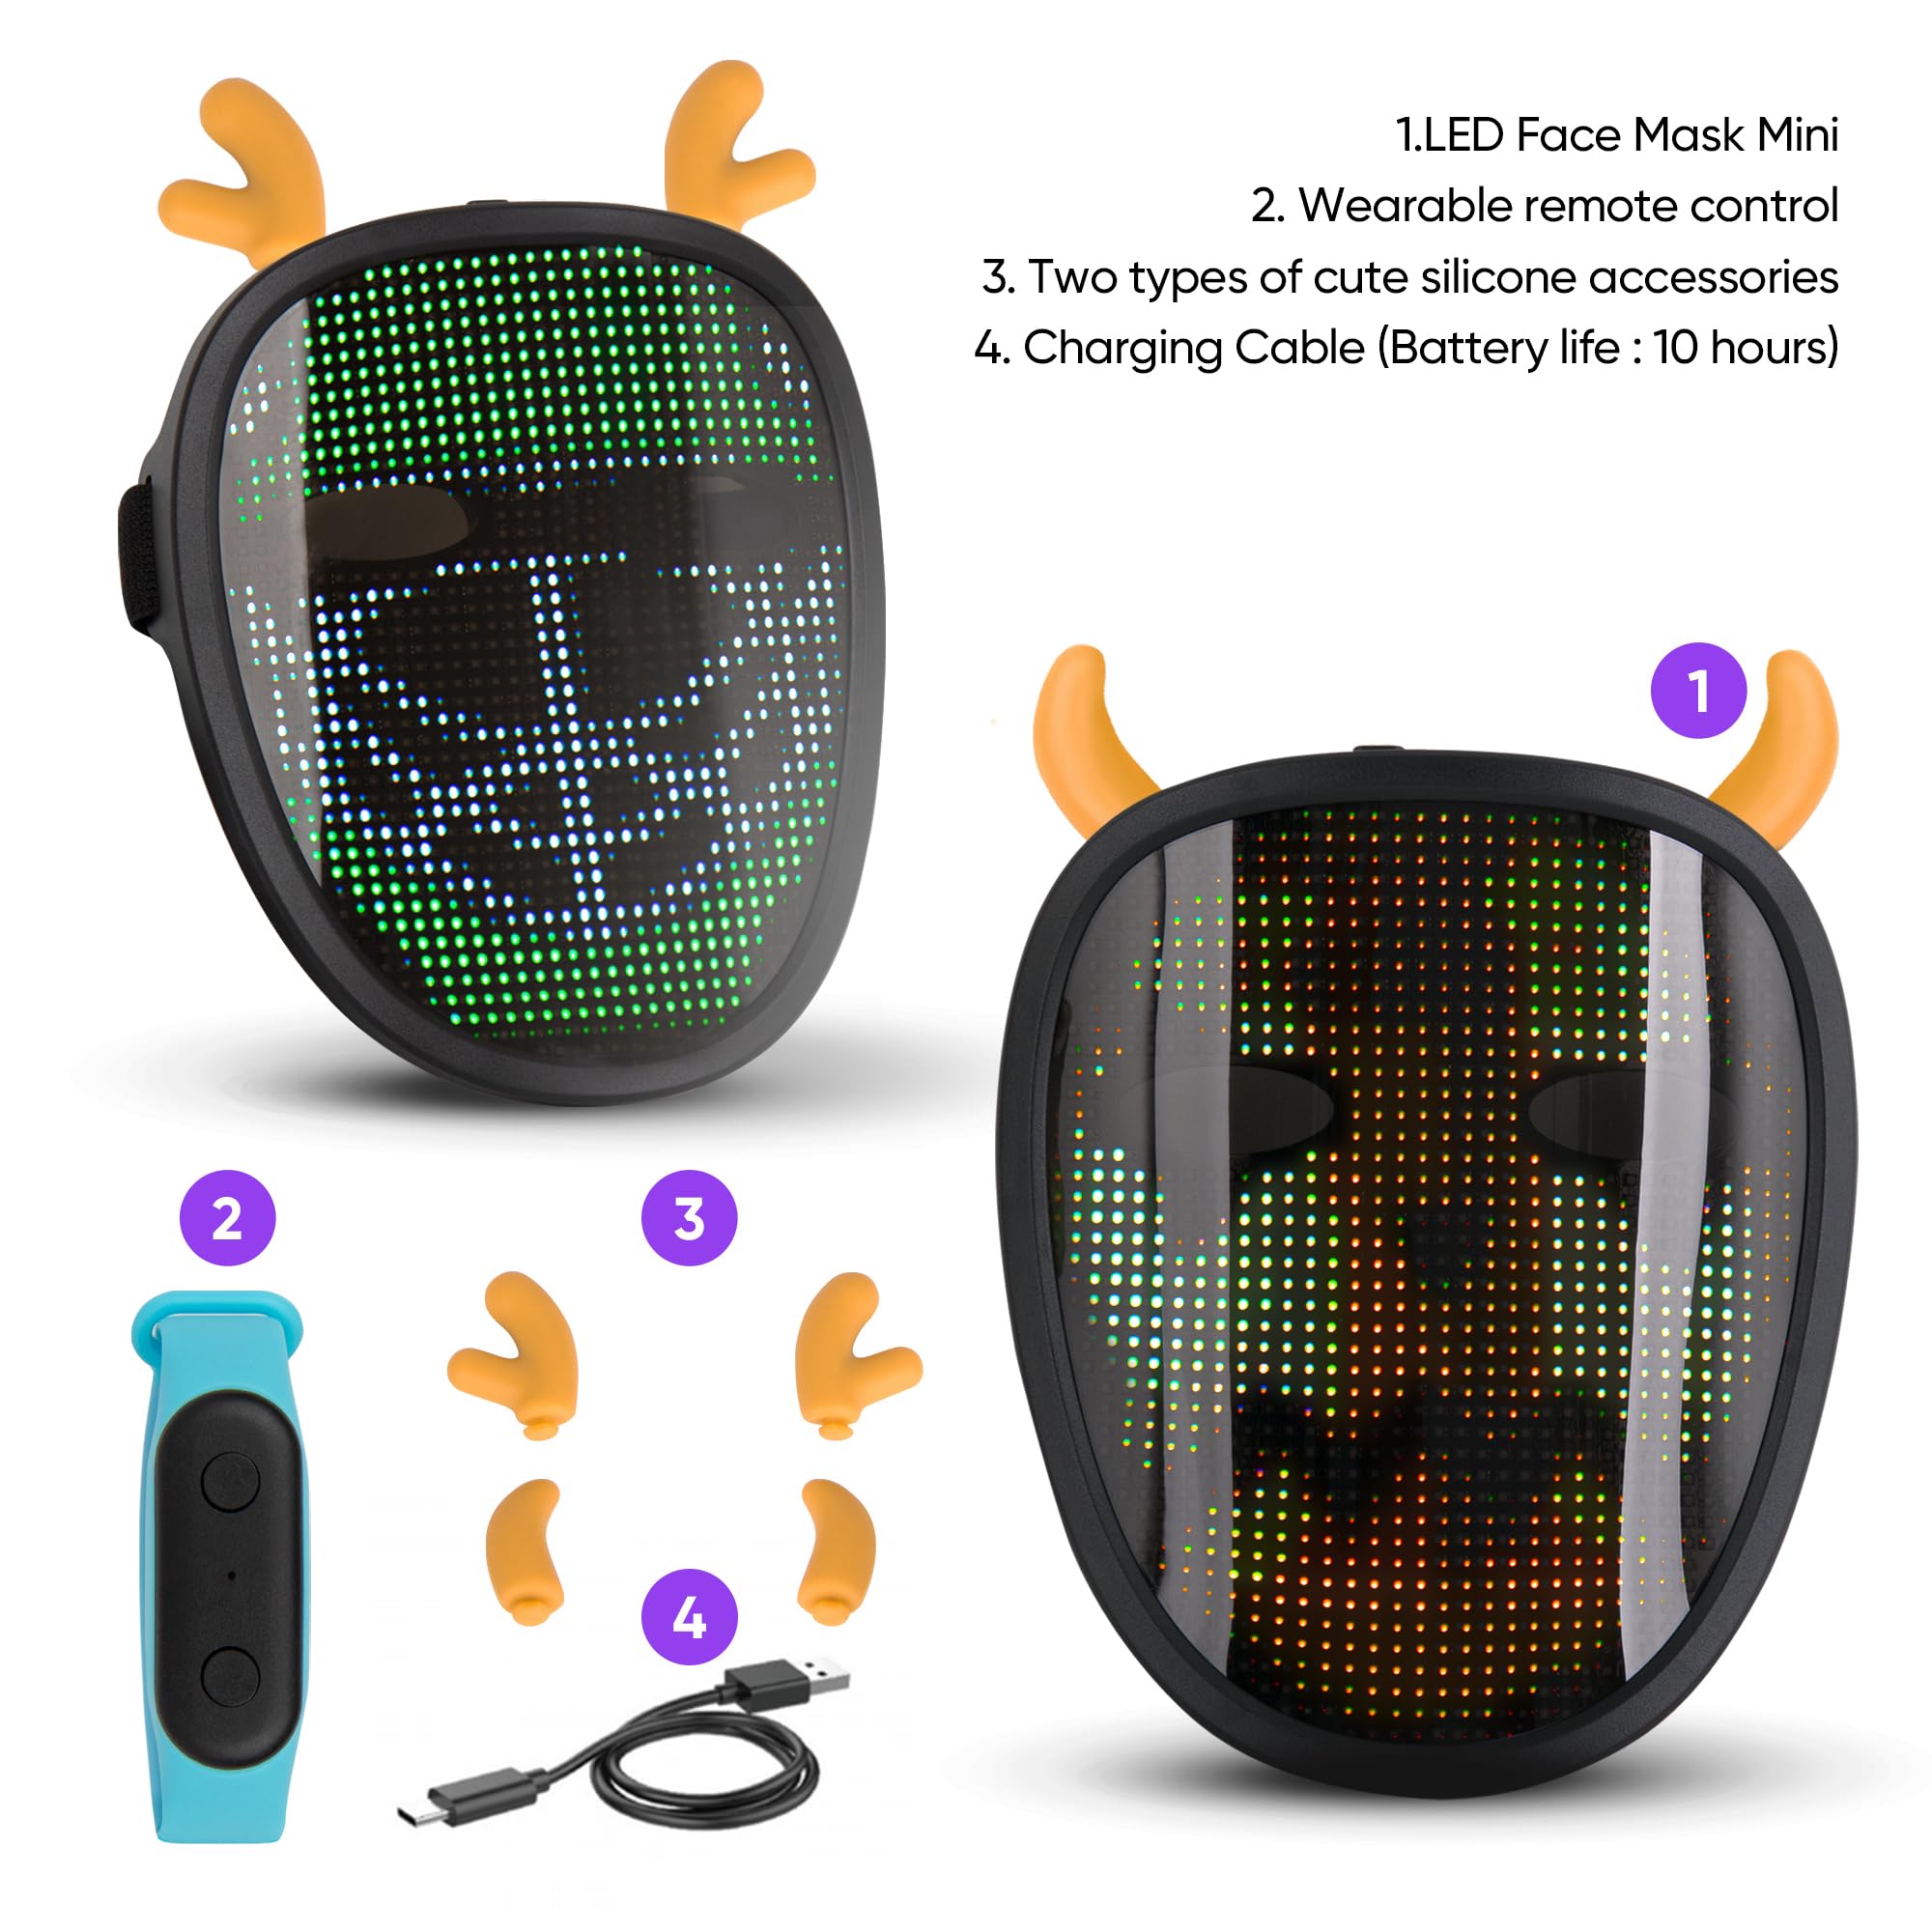 CHEMION led face mask mini for kids - Halloween Christmas Birthday Holidays Carnival Festival Masquerade Fun stuff Cosplay Toy Gift Party favors for kids 4-12 for boys for girls